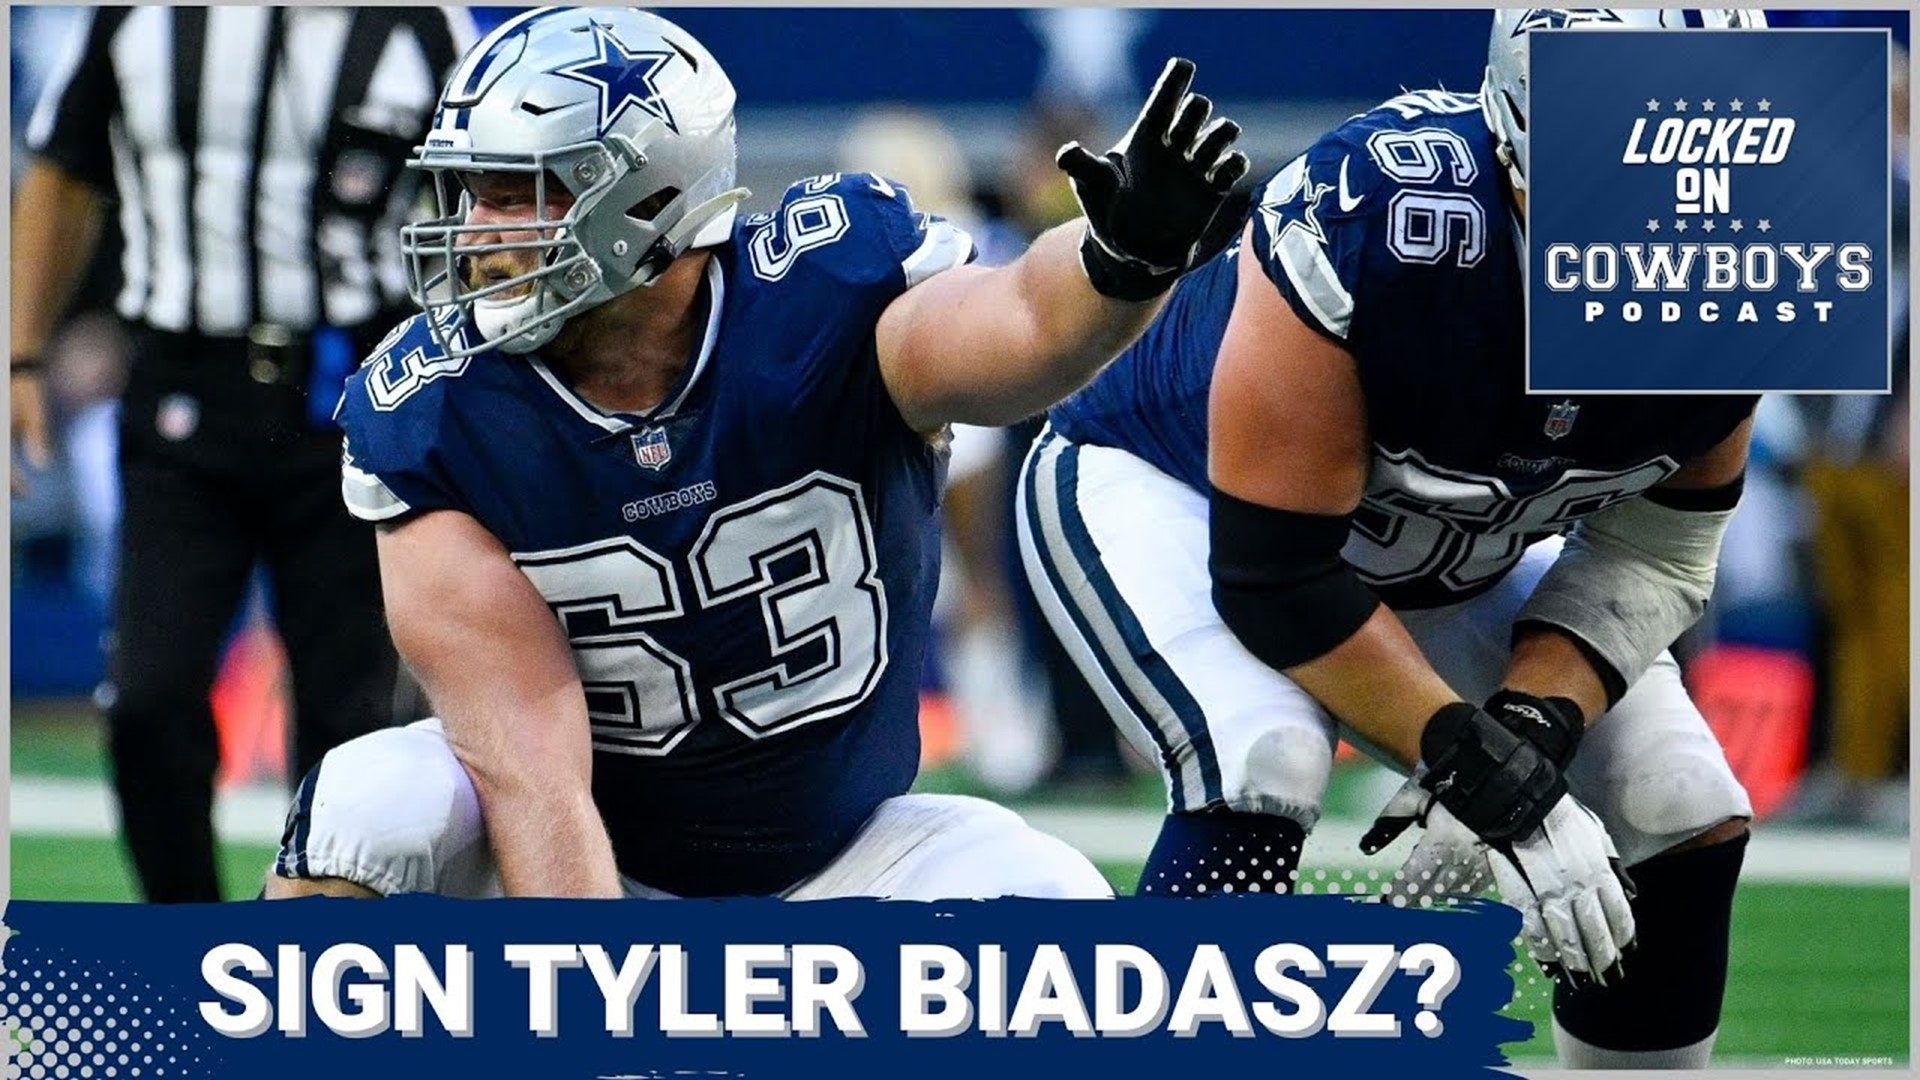 Marcus Mosher and Landon McCool review Dallas' interior offensive line, and discuss whether the team should consider signing Tyler Biadasz to a contract extension.